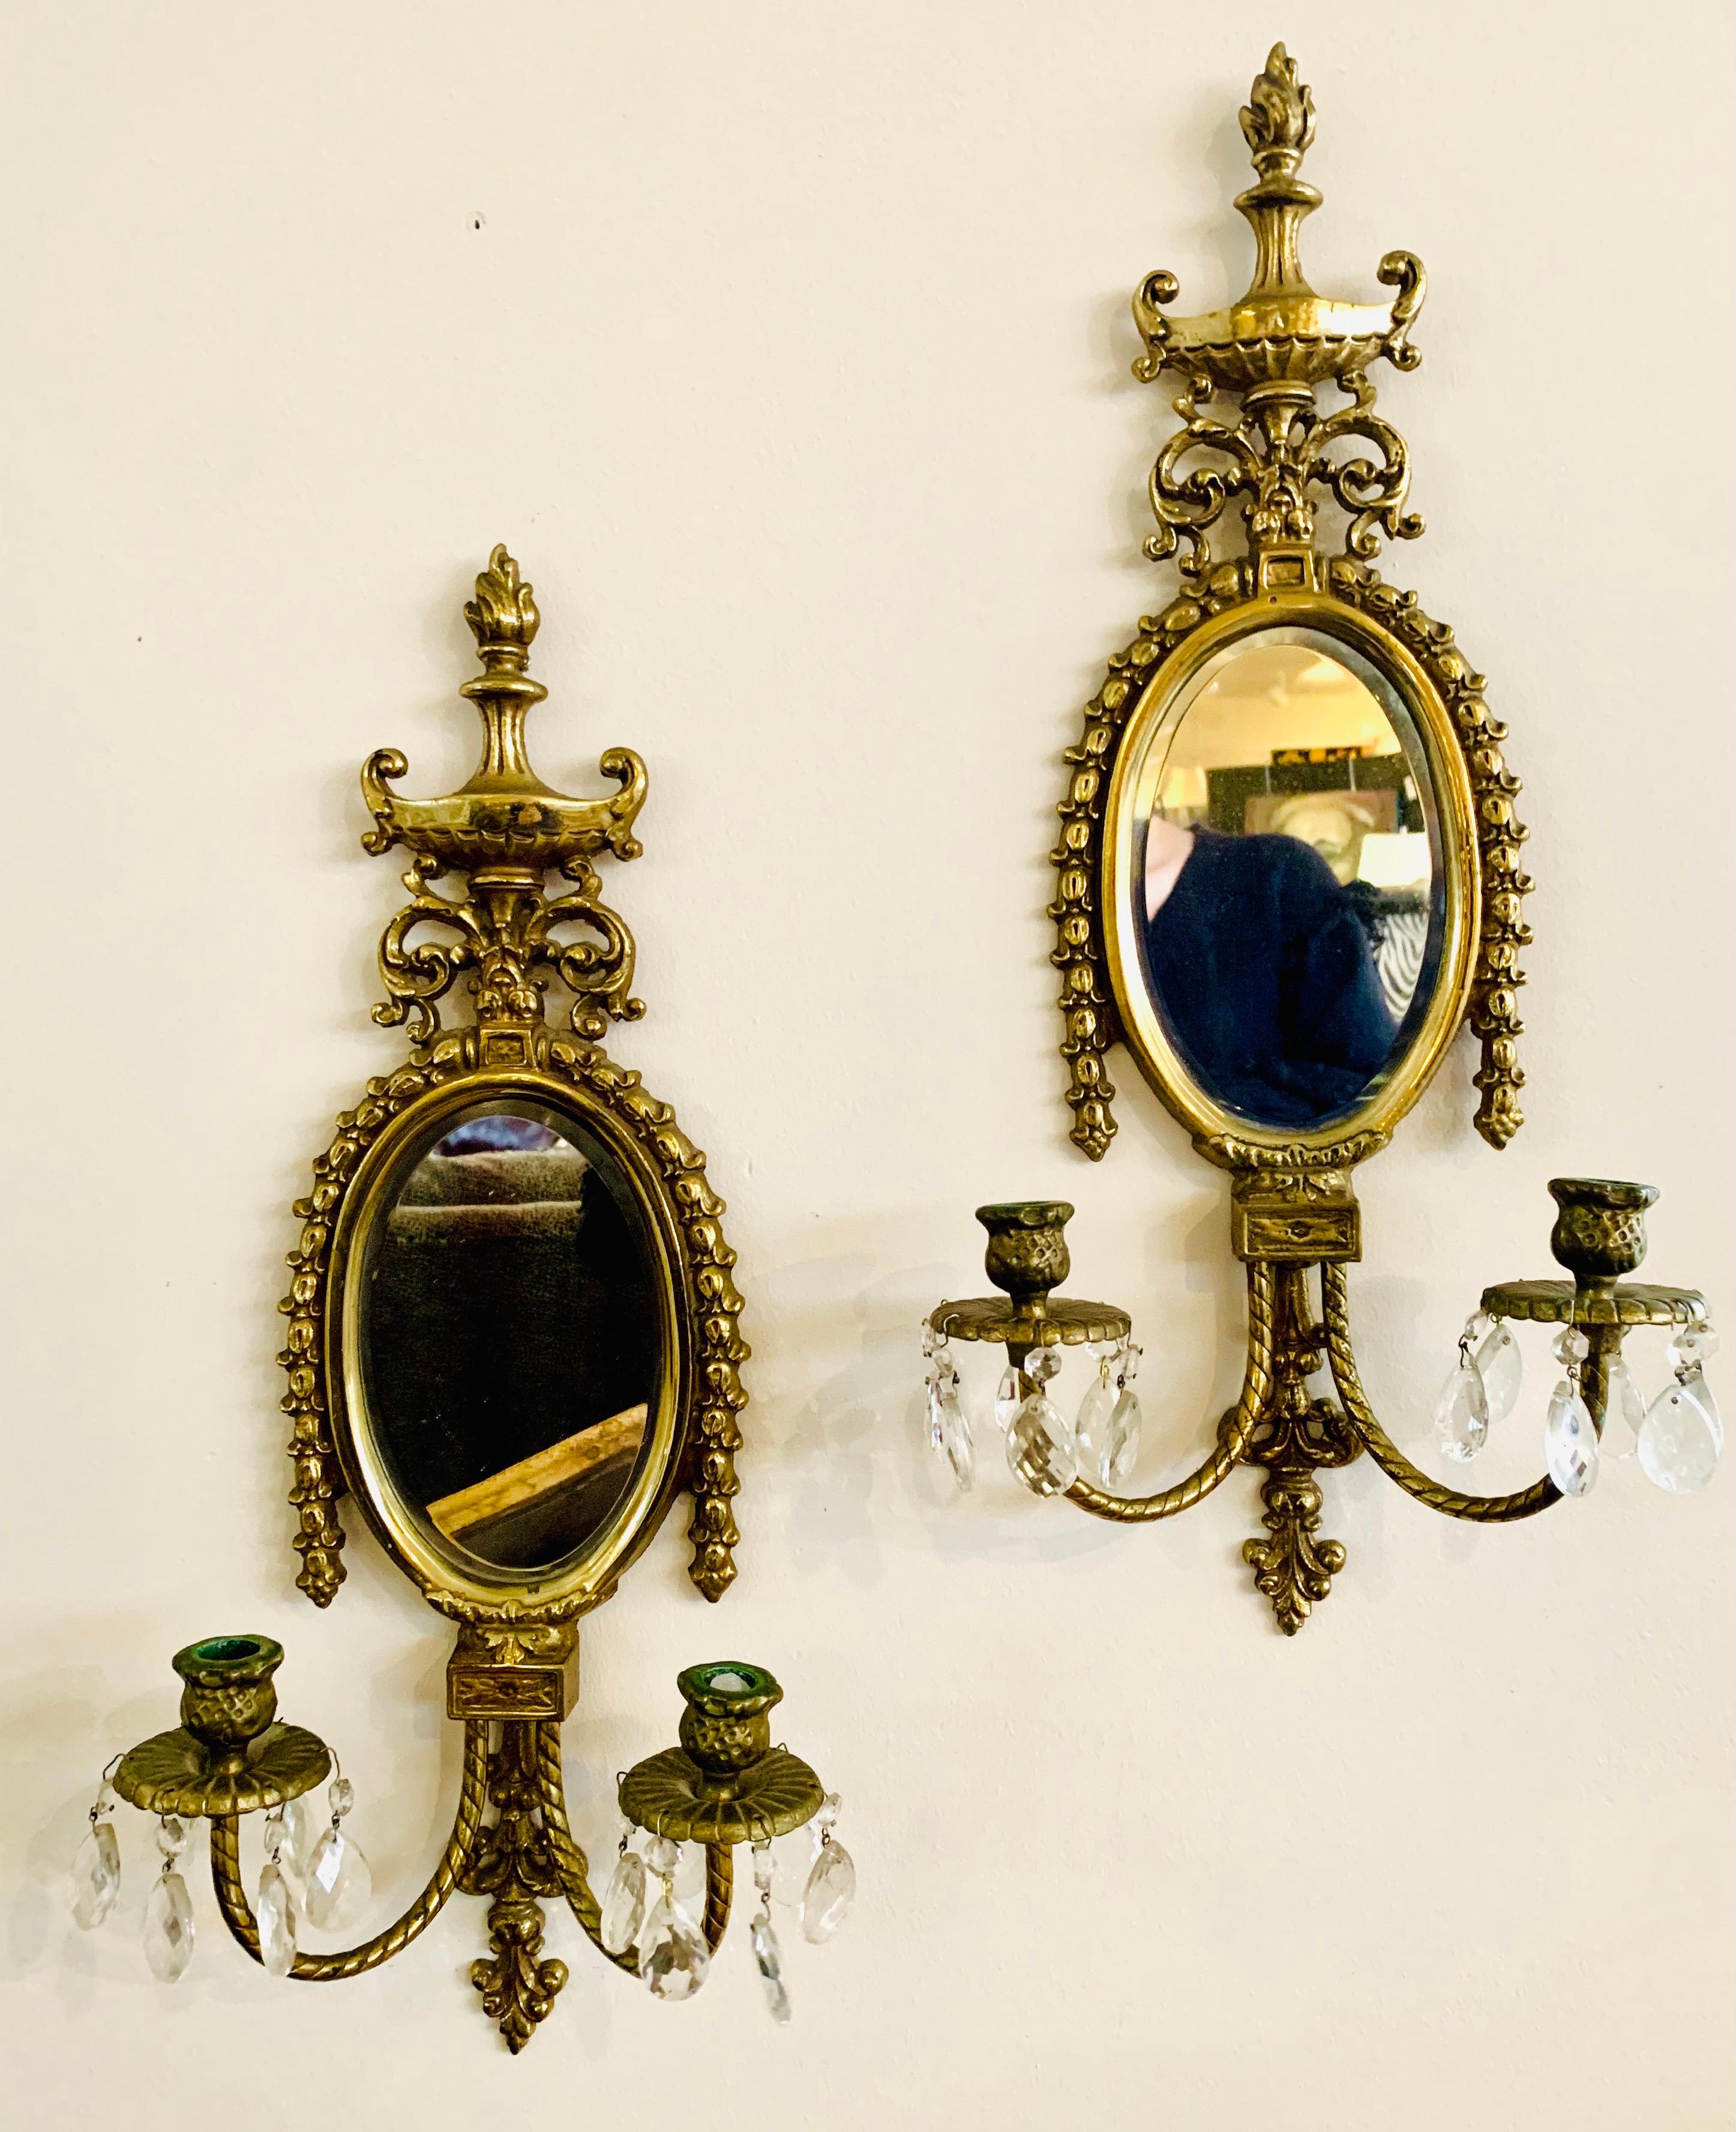 Gorgeous vintage solid cast brass wall sconces with beveled mirrors. The double candle arms detail a rope pattern. Each holds two candles and have dangling crystals.